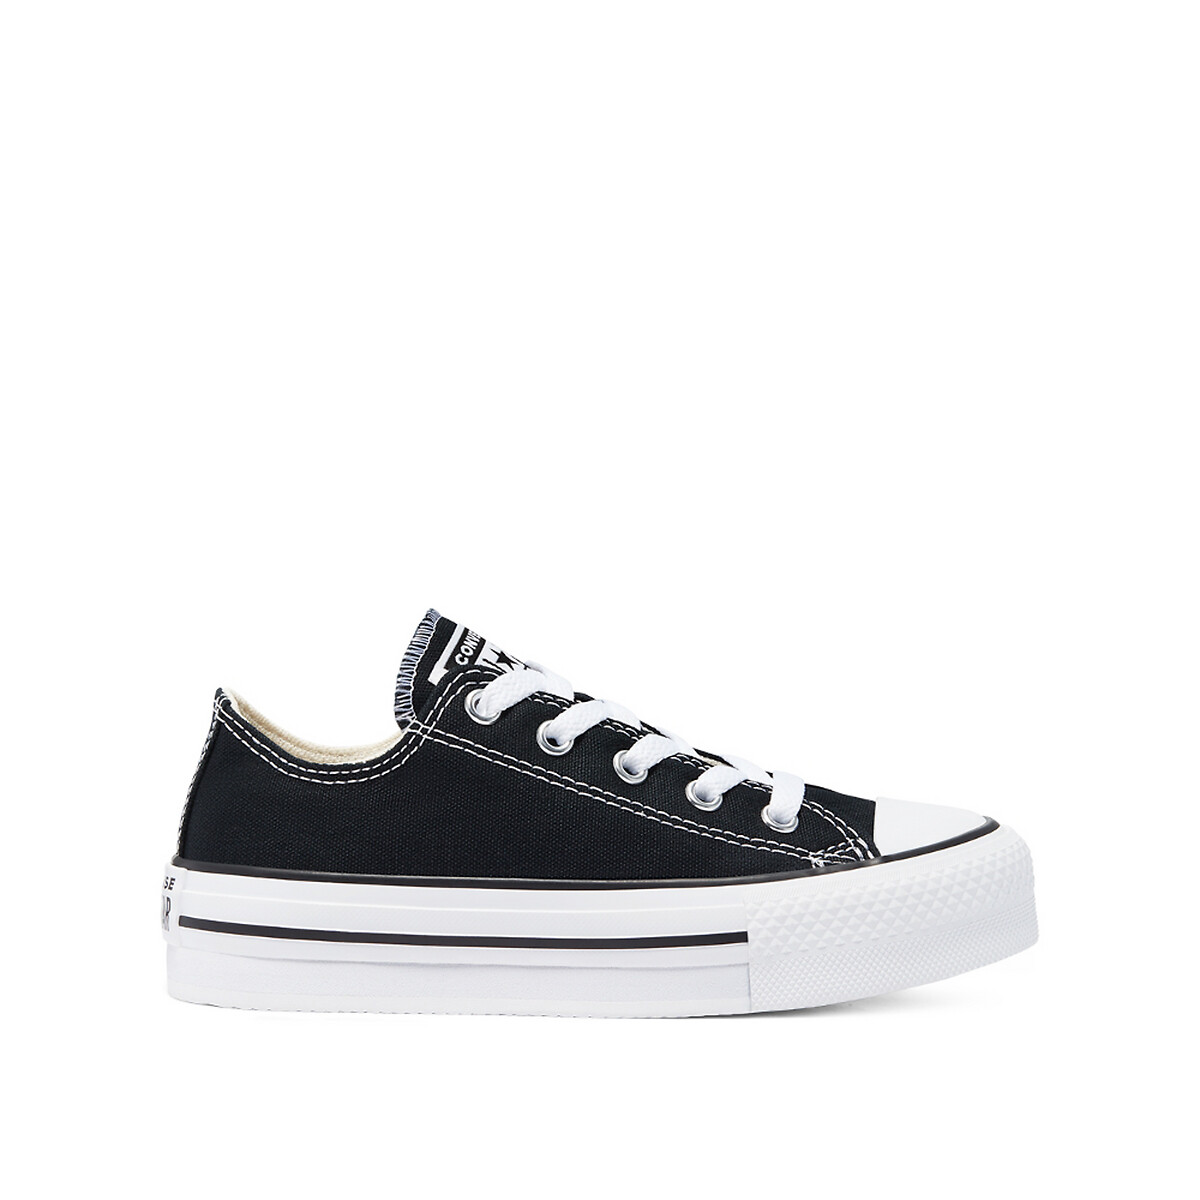 black and white converse all star